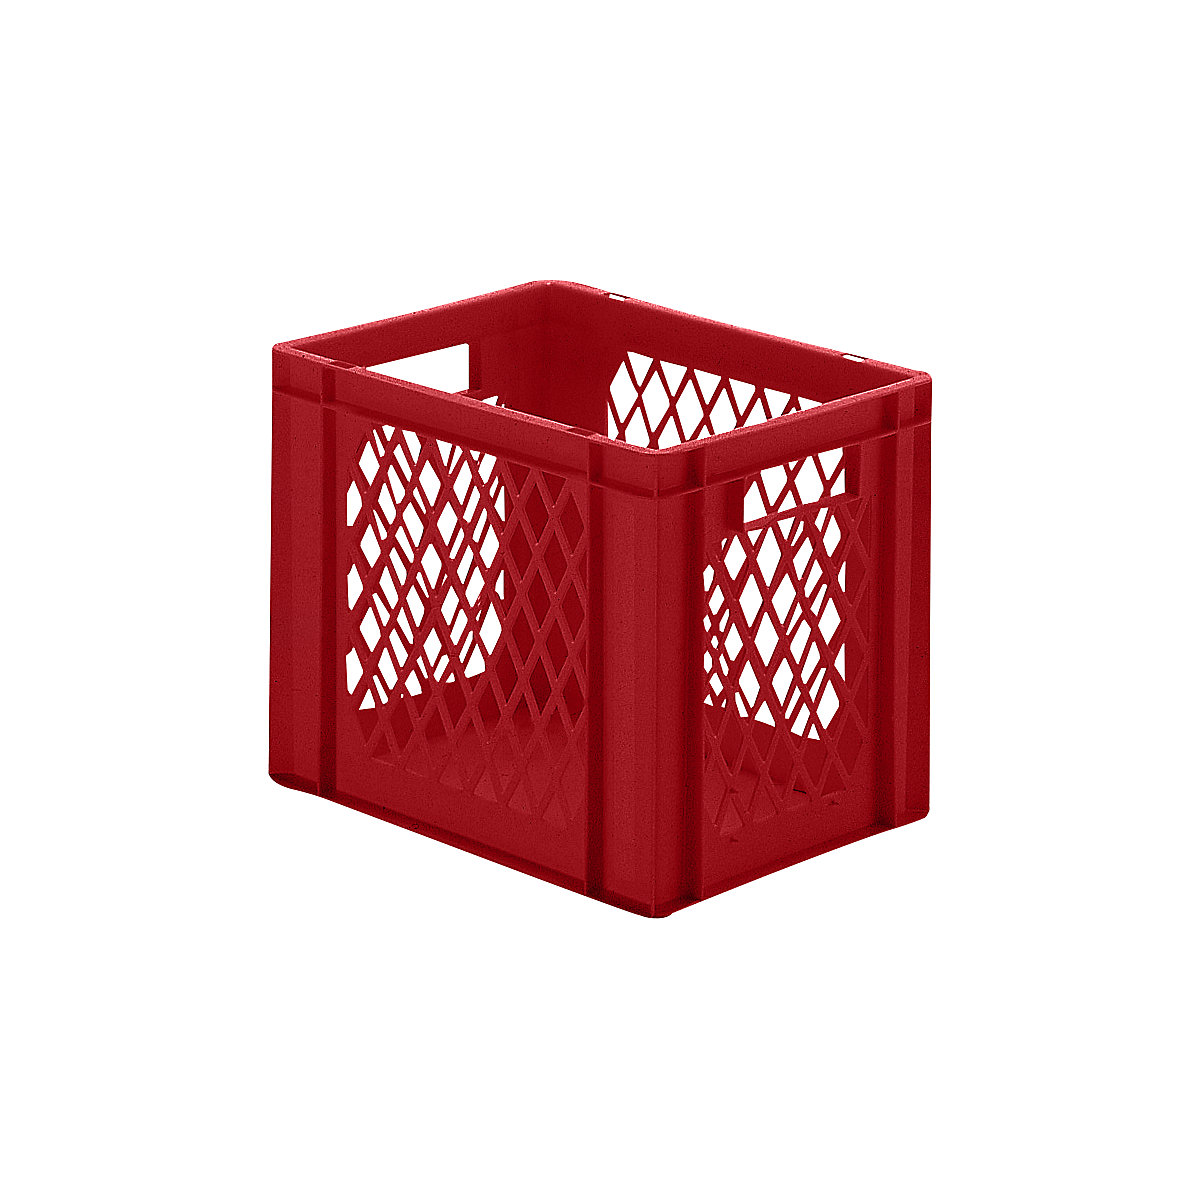 Euro stacking container, perforated walls, closed base, LxWxH 400 x 300 x 320 mm, red, pack of 5